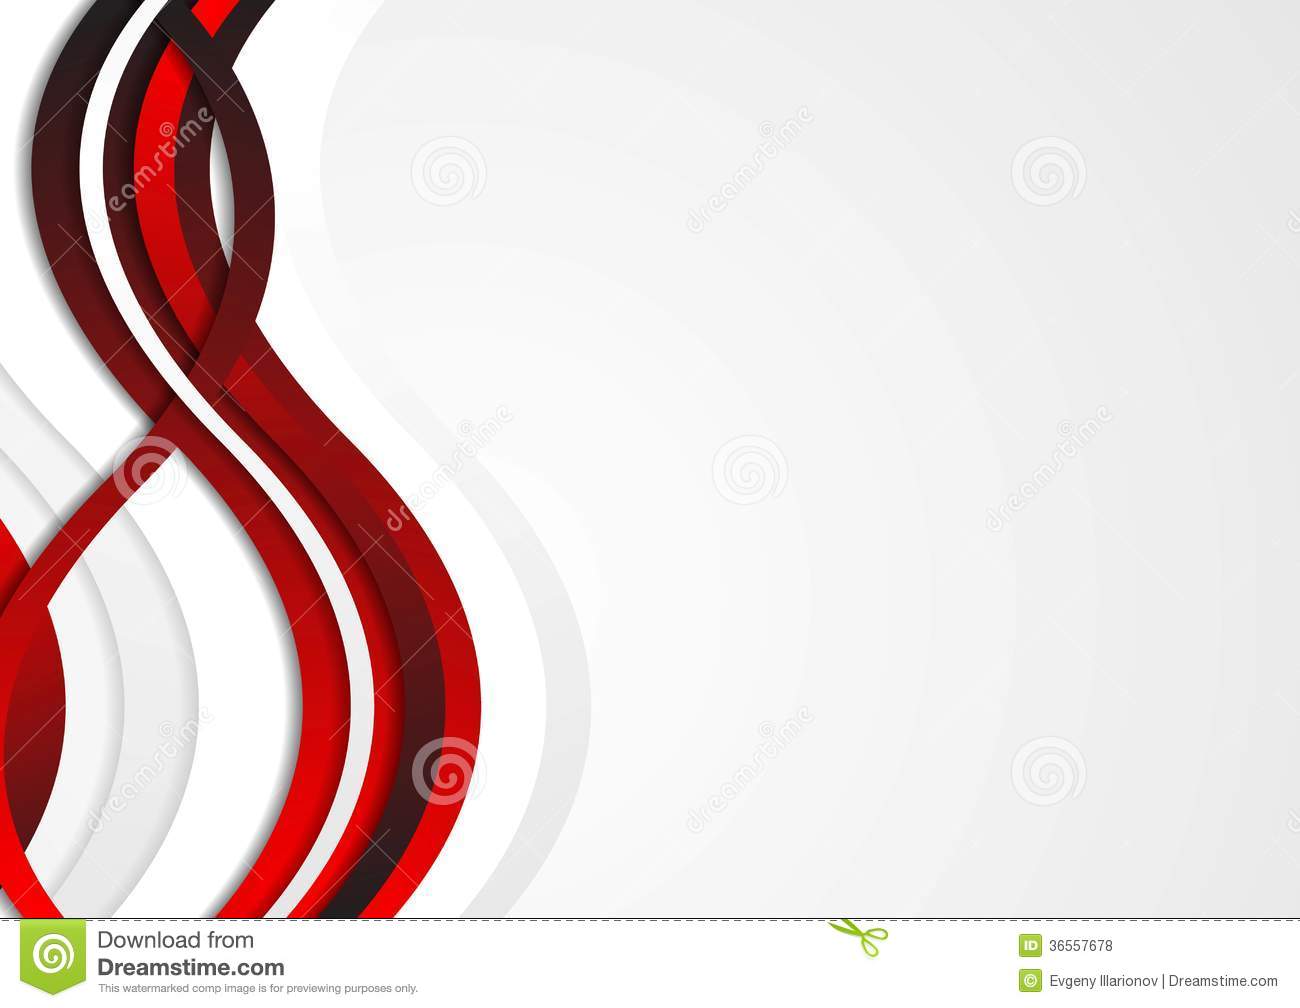 Red Wave Abstract Vector Design